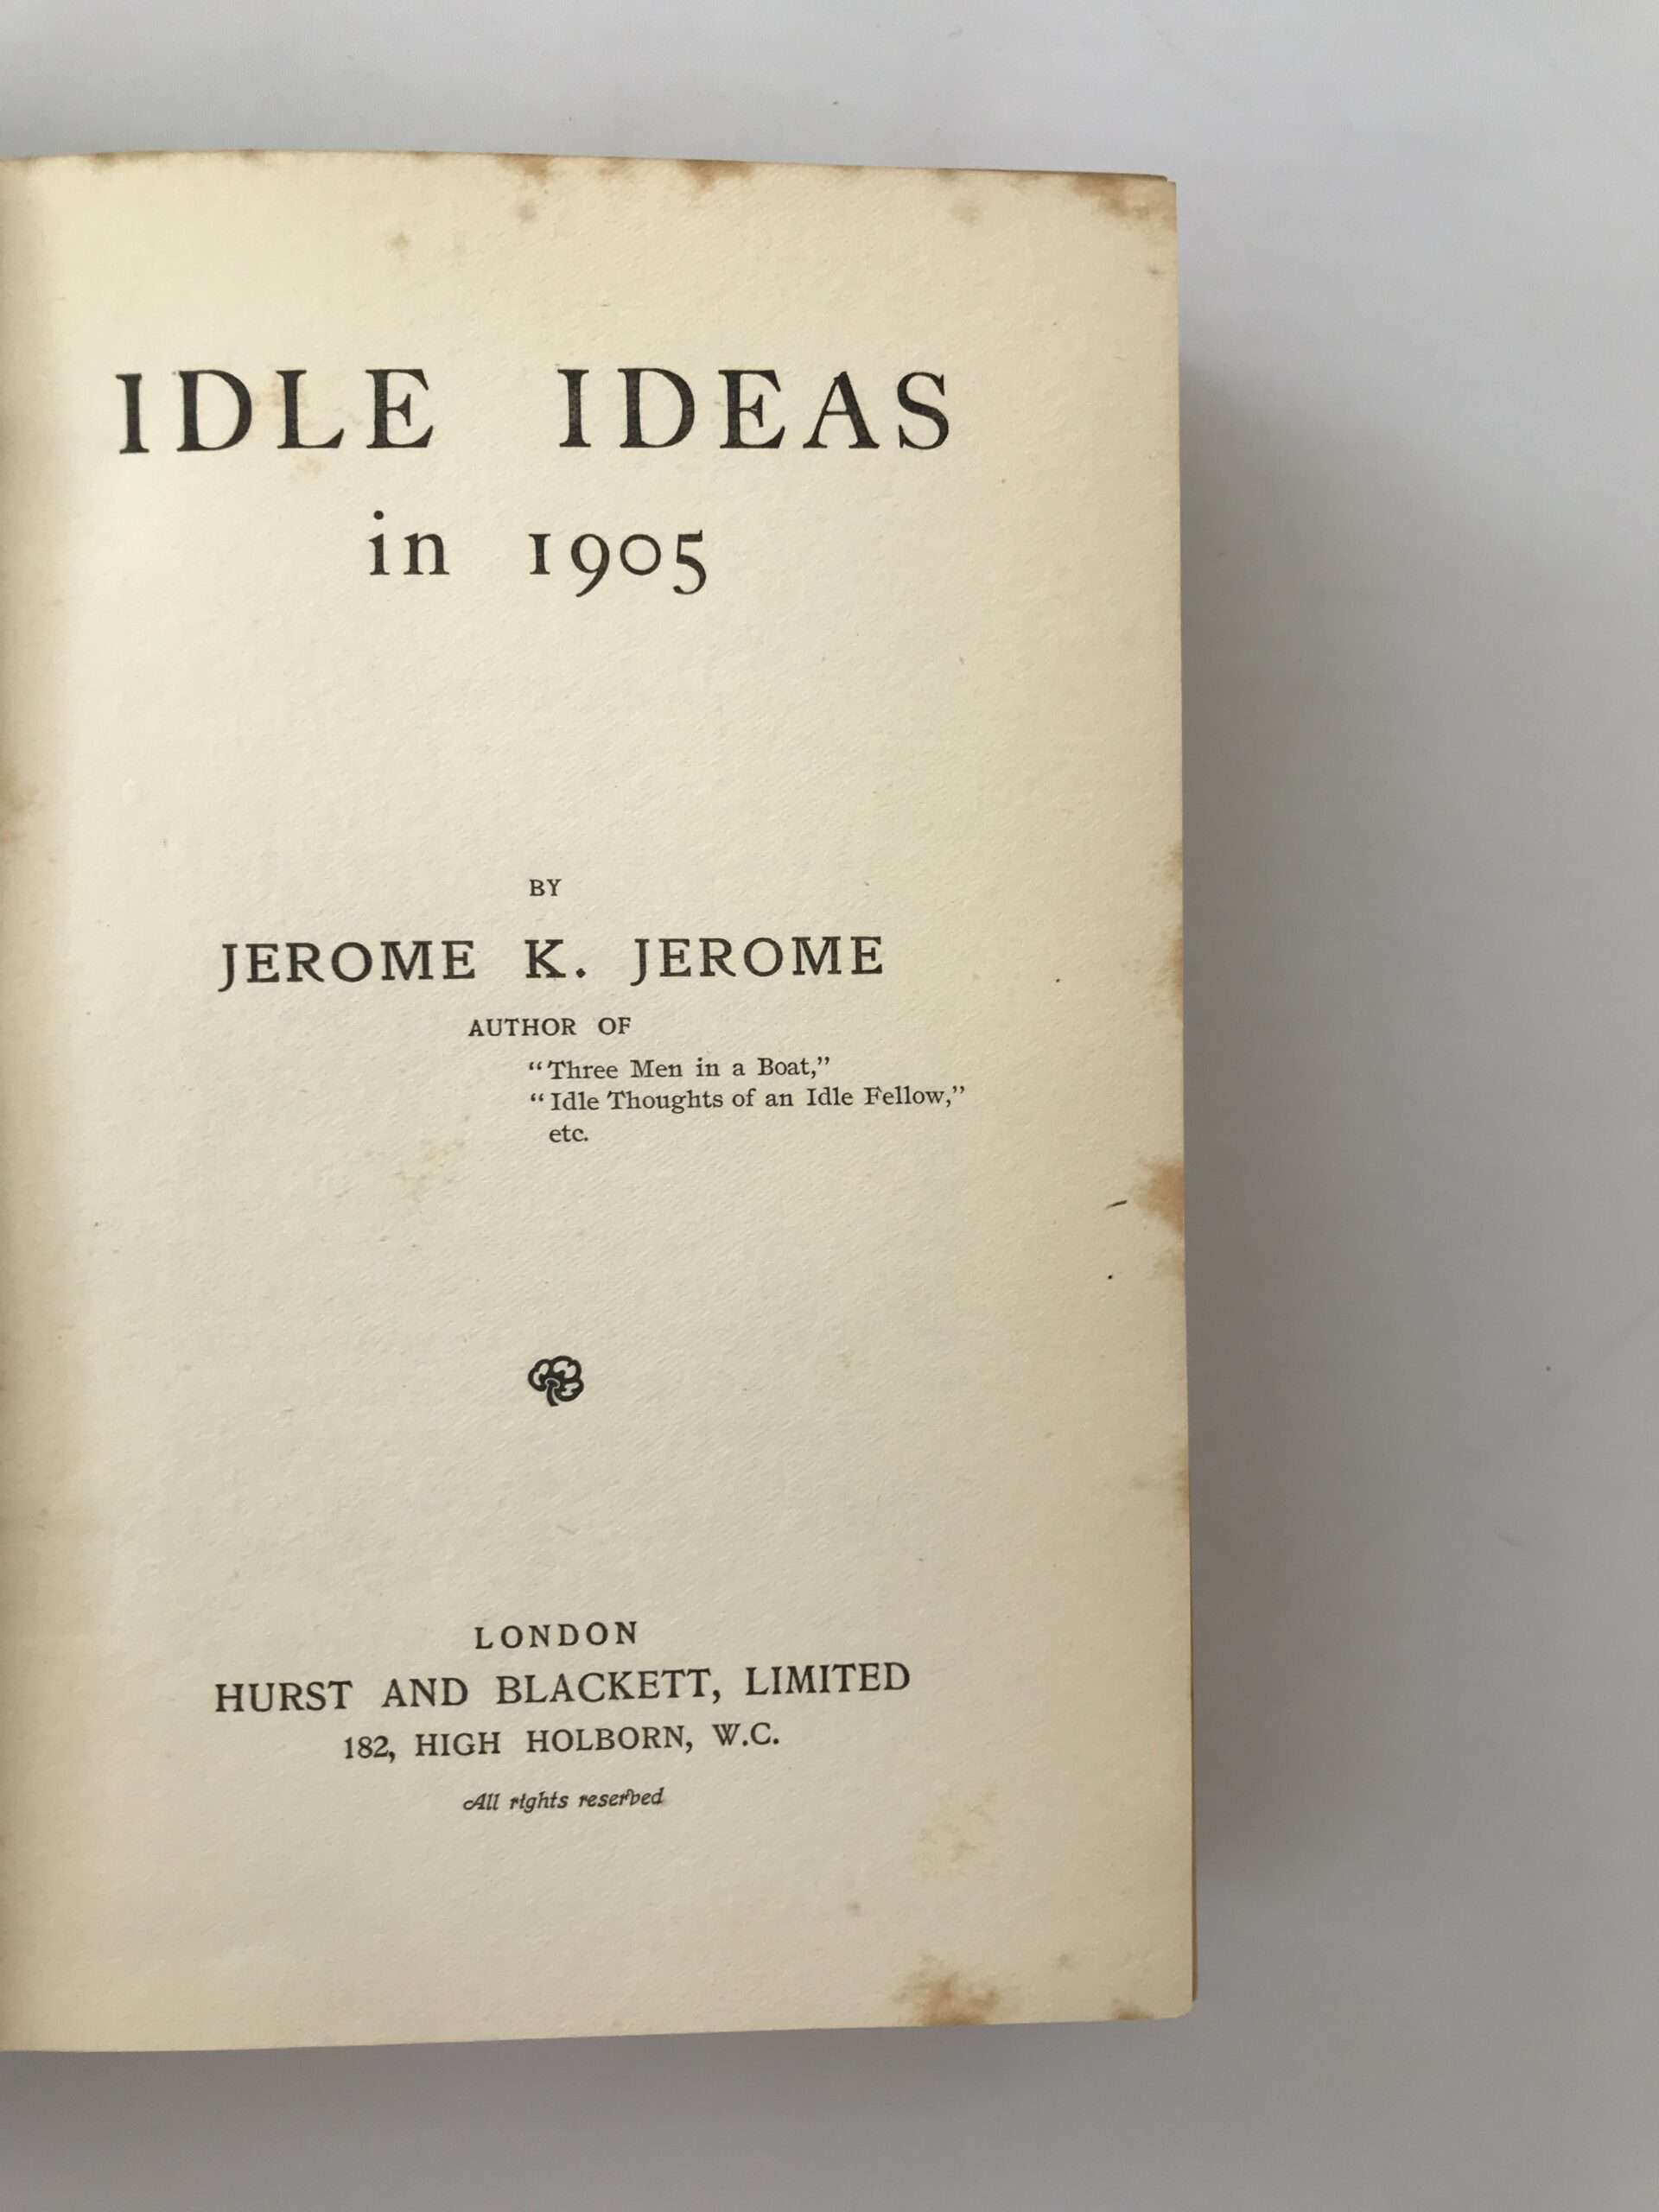 jerome k jerome ideal ideas in 1905 first edition2